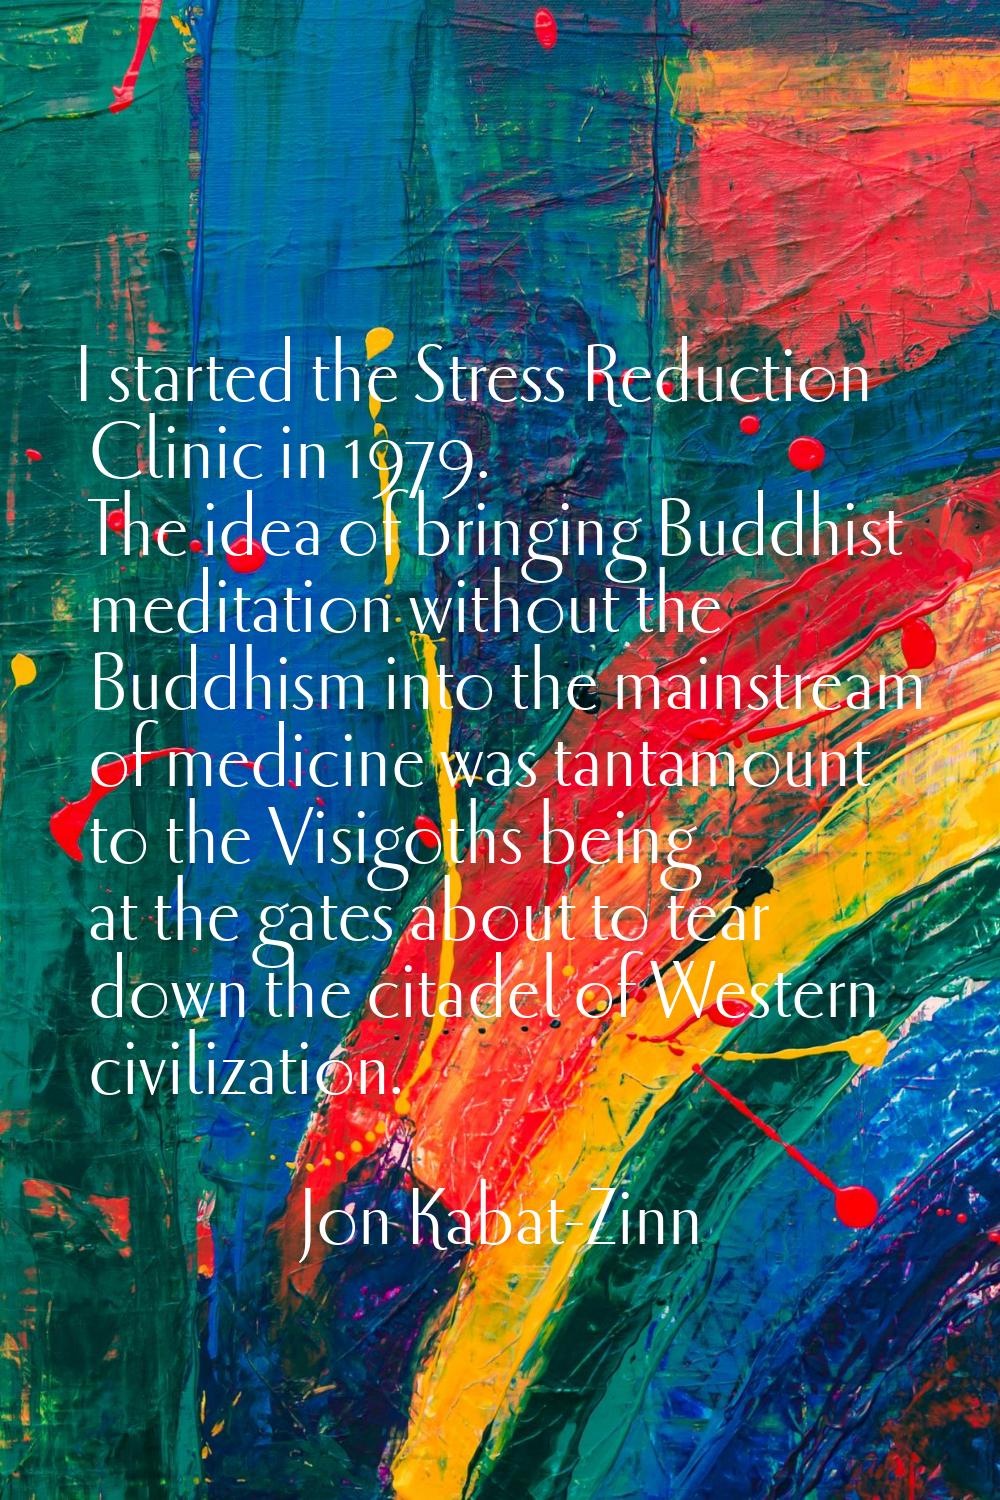 I started the Stress Reduction Clinic in 1979. The idea of bringing Buddhist meditation without the